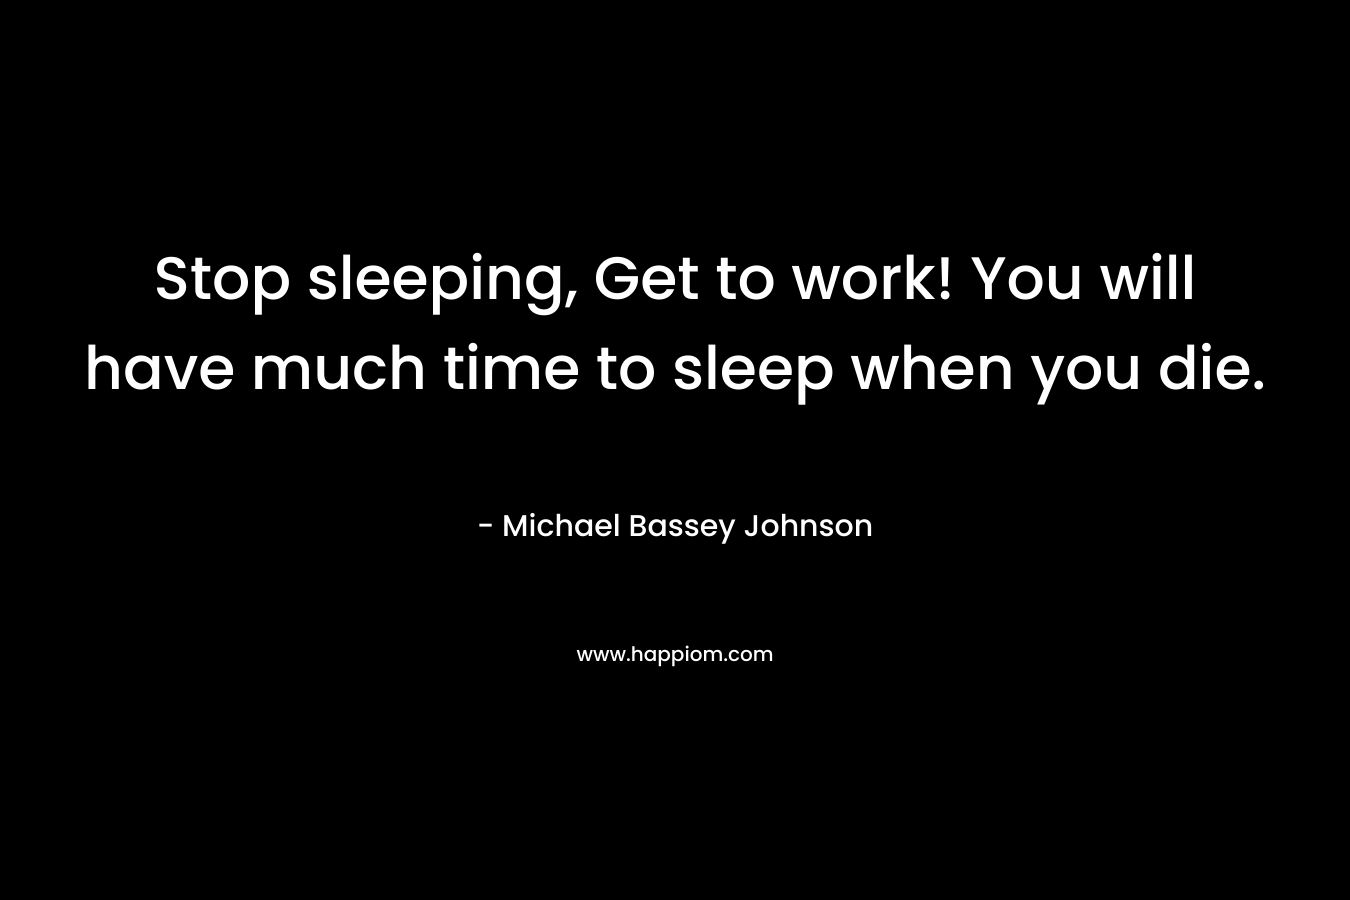 Stop sleeping, Get to work! You will have much time to sleep when you die.